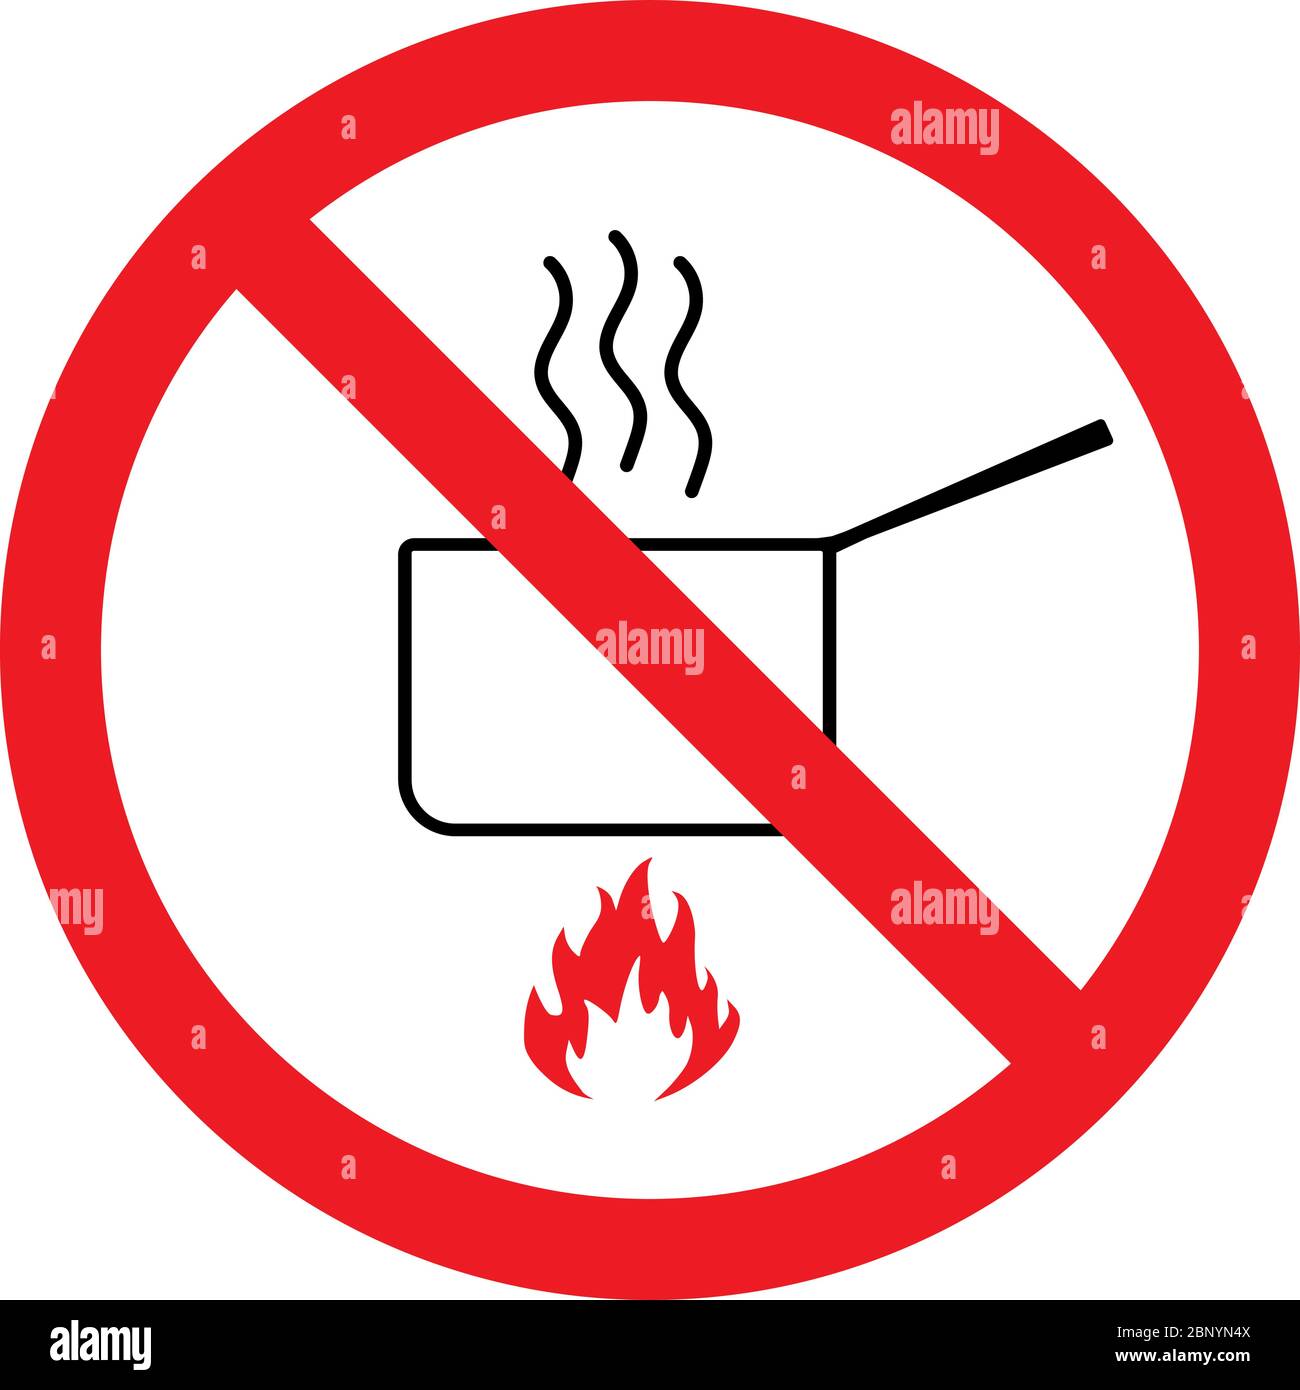 No cooking sign. Prevent fire accidents in office or industry. Stock Vector